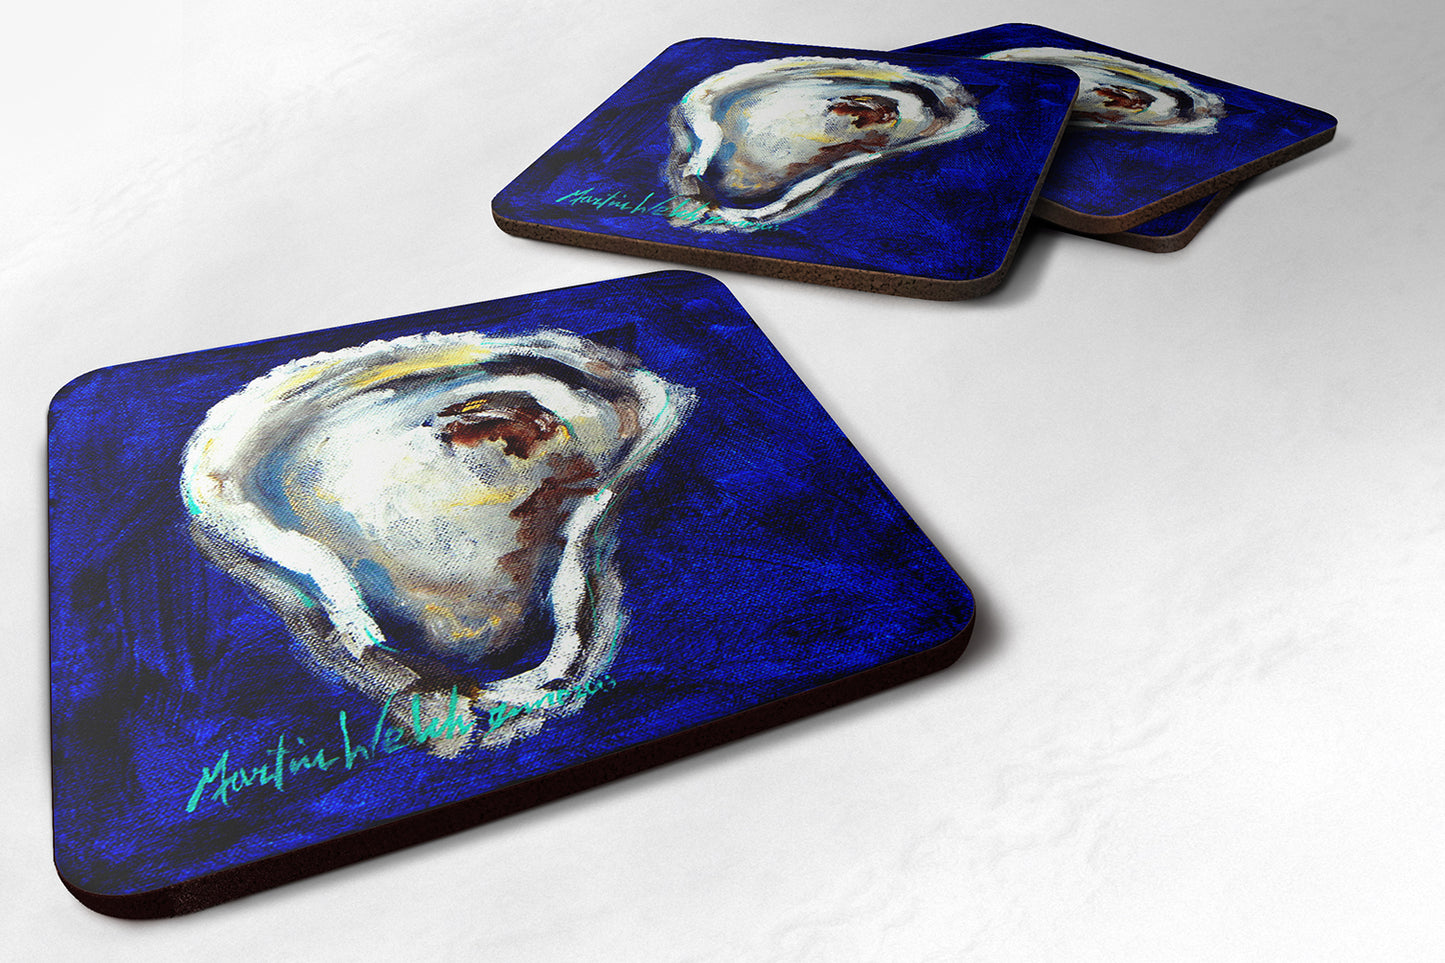 Buy this Oyster One Shell Foam Coaster Set of 4